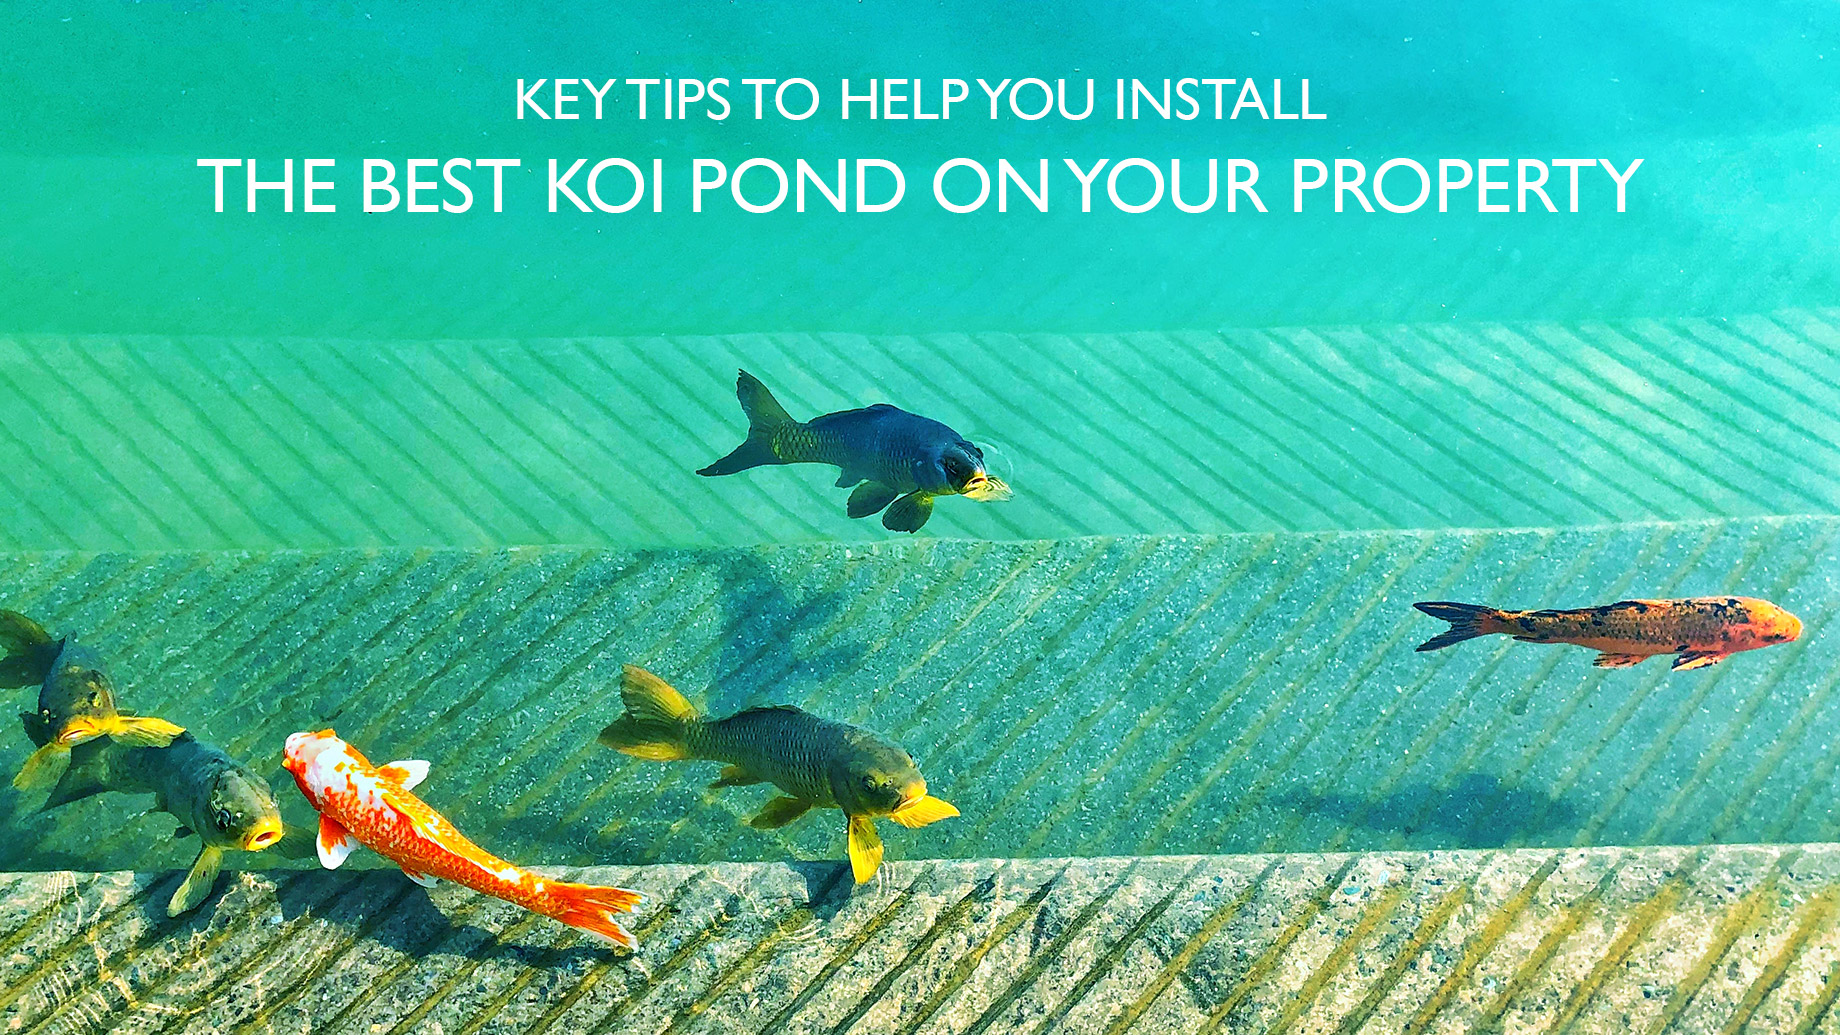 Key Tips to Help You Install the Best Koi Pond on Your Property